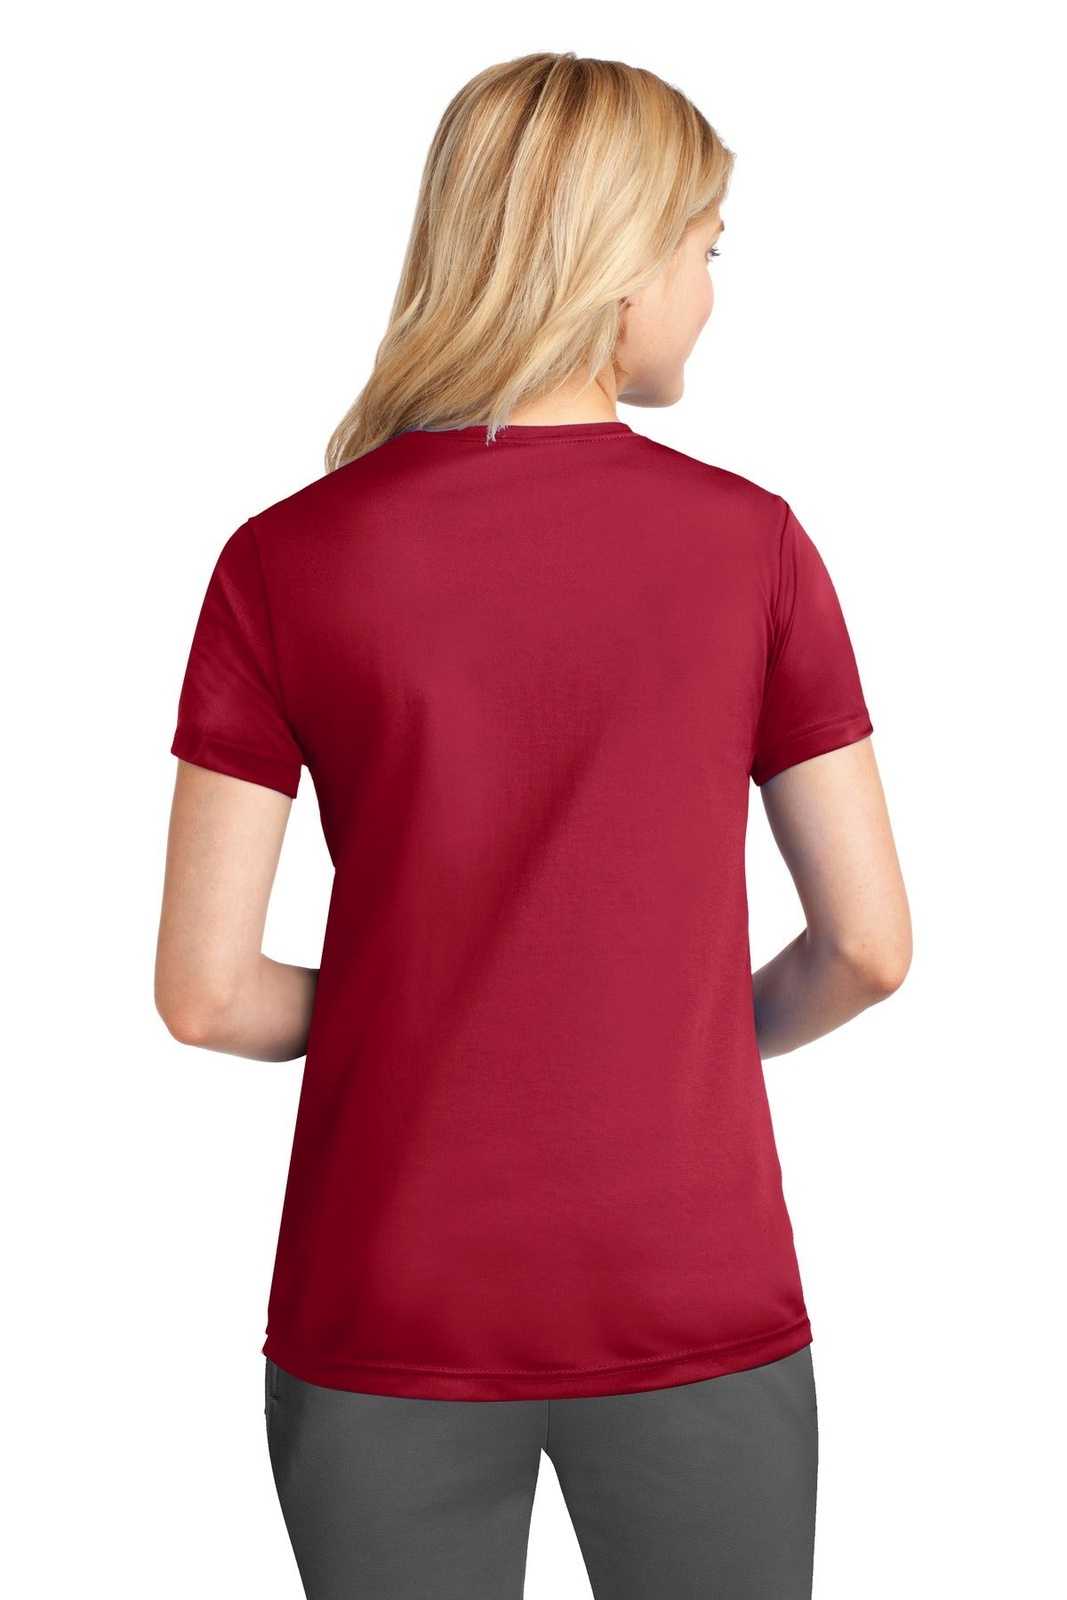 Port &amp; Company LPC380 Ladies Performance Tee - Red - HIT a Double - 2